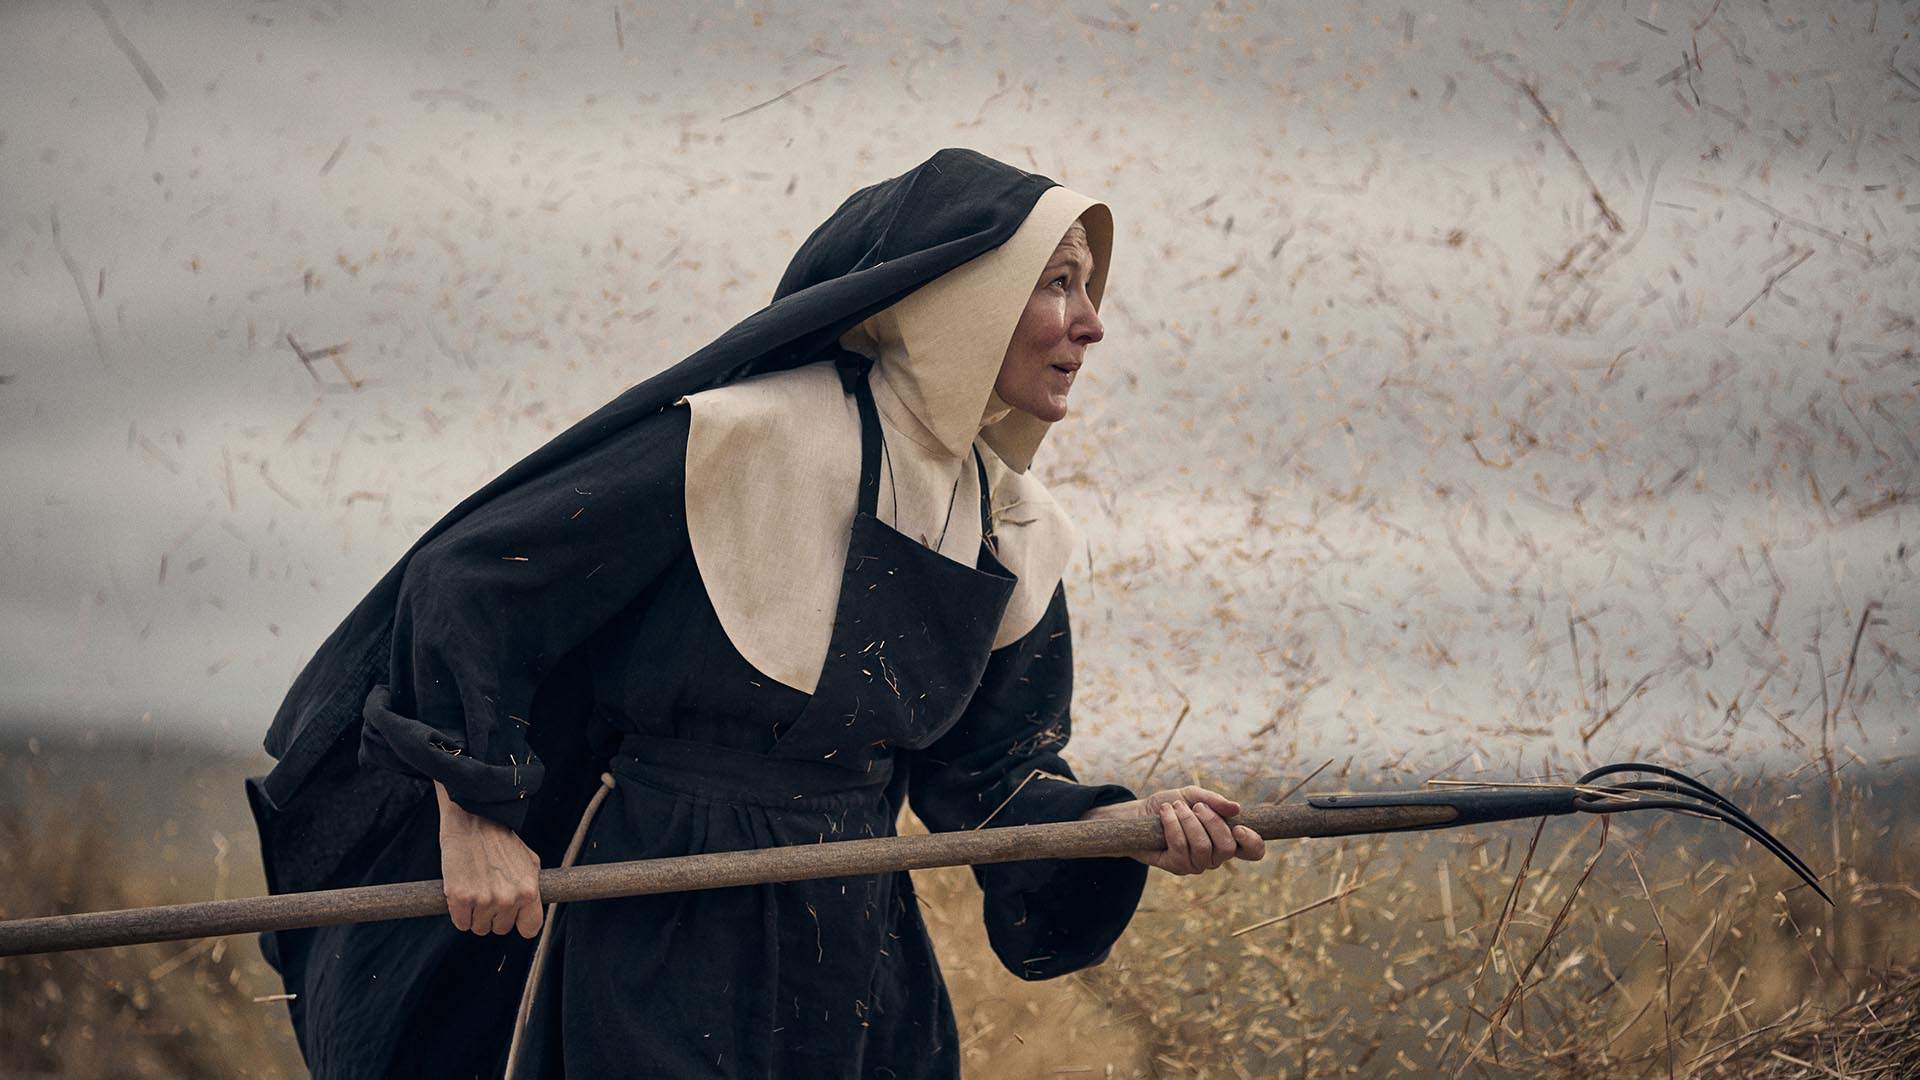 Cate Blanchett Plays a Renegade Nun in the Trailer for Warwick Thornton's 'The New Boy'